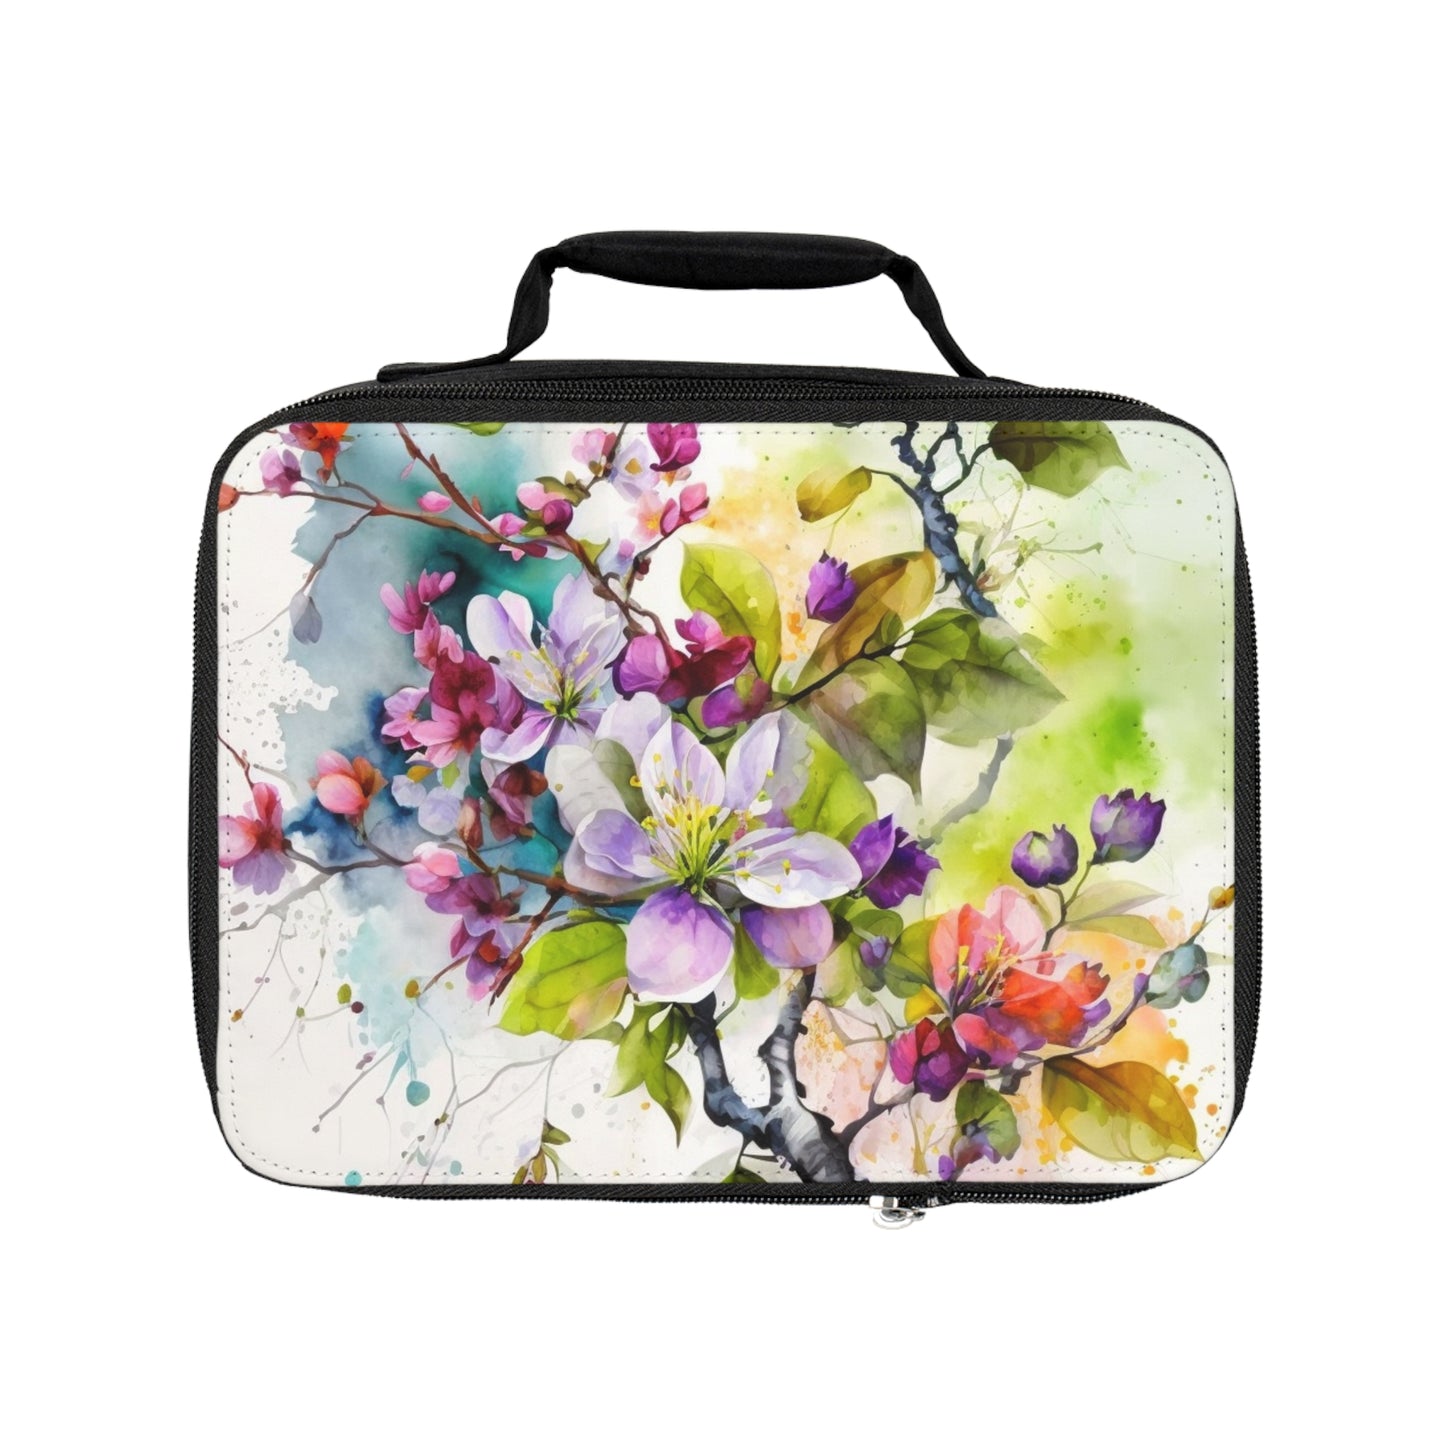 Lunch Bag Mother Nature Bright Spring Colors Realistic Watercolor 4